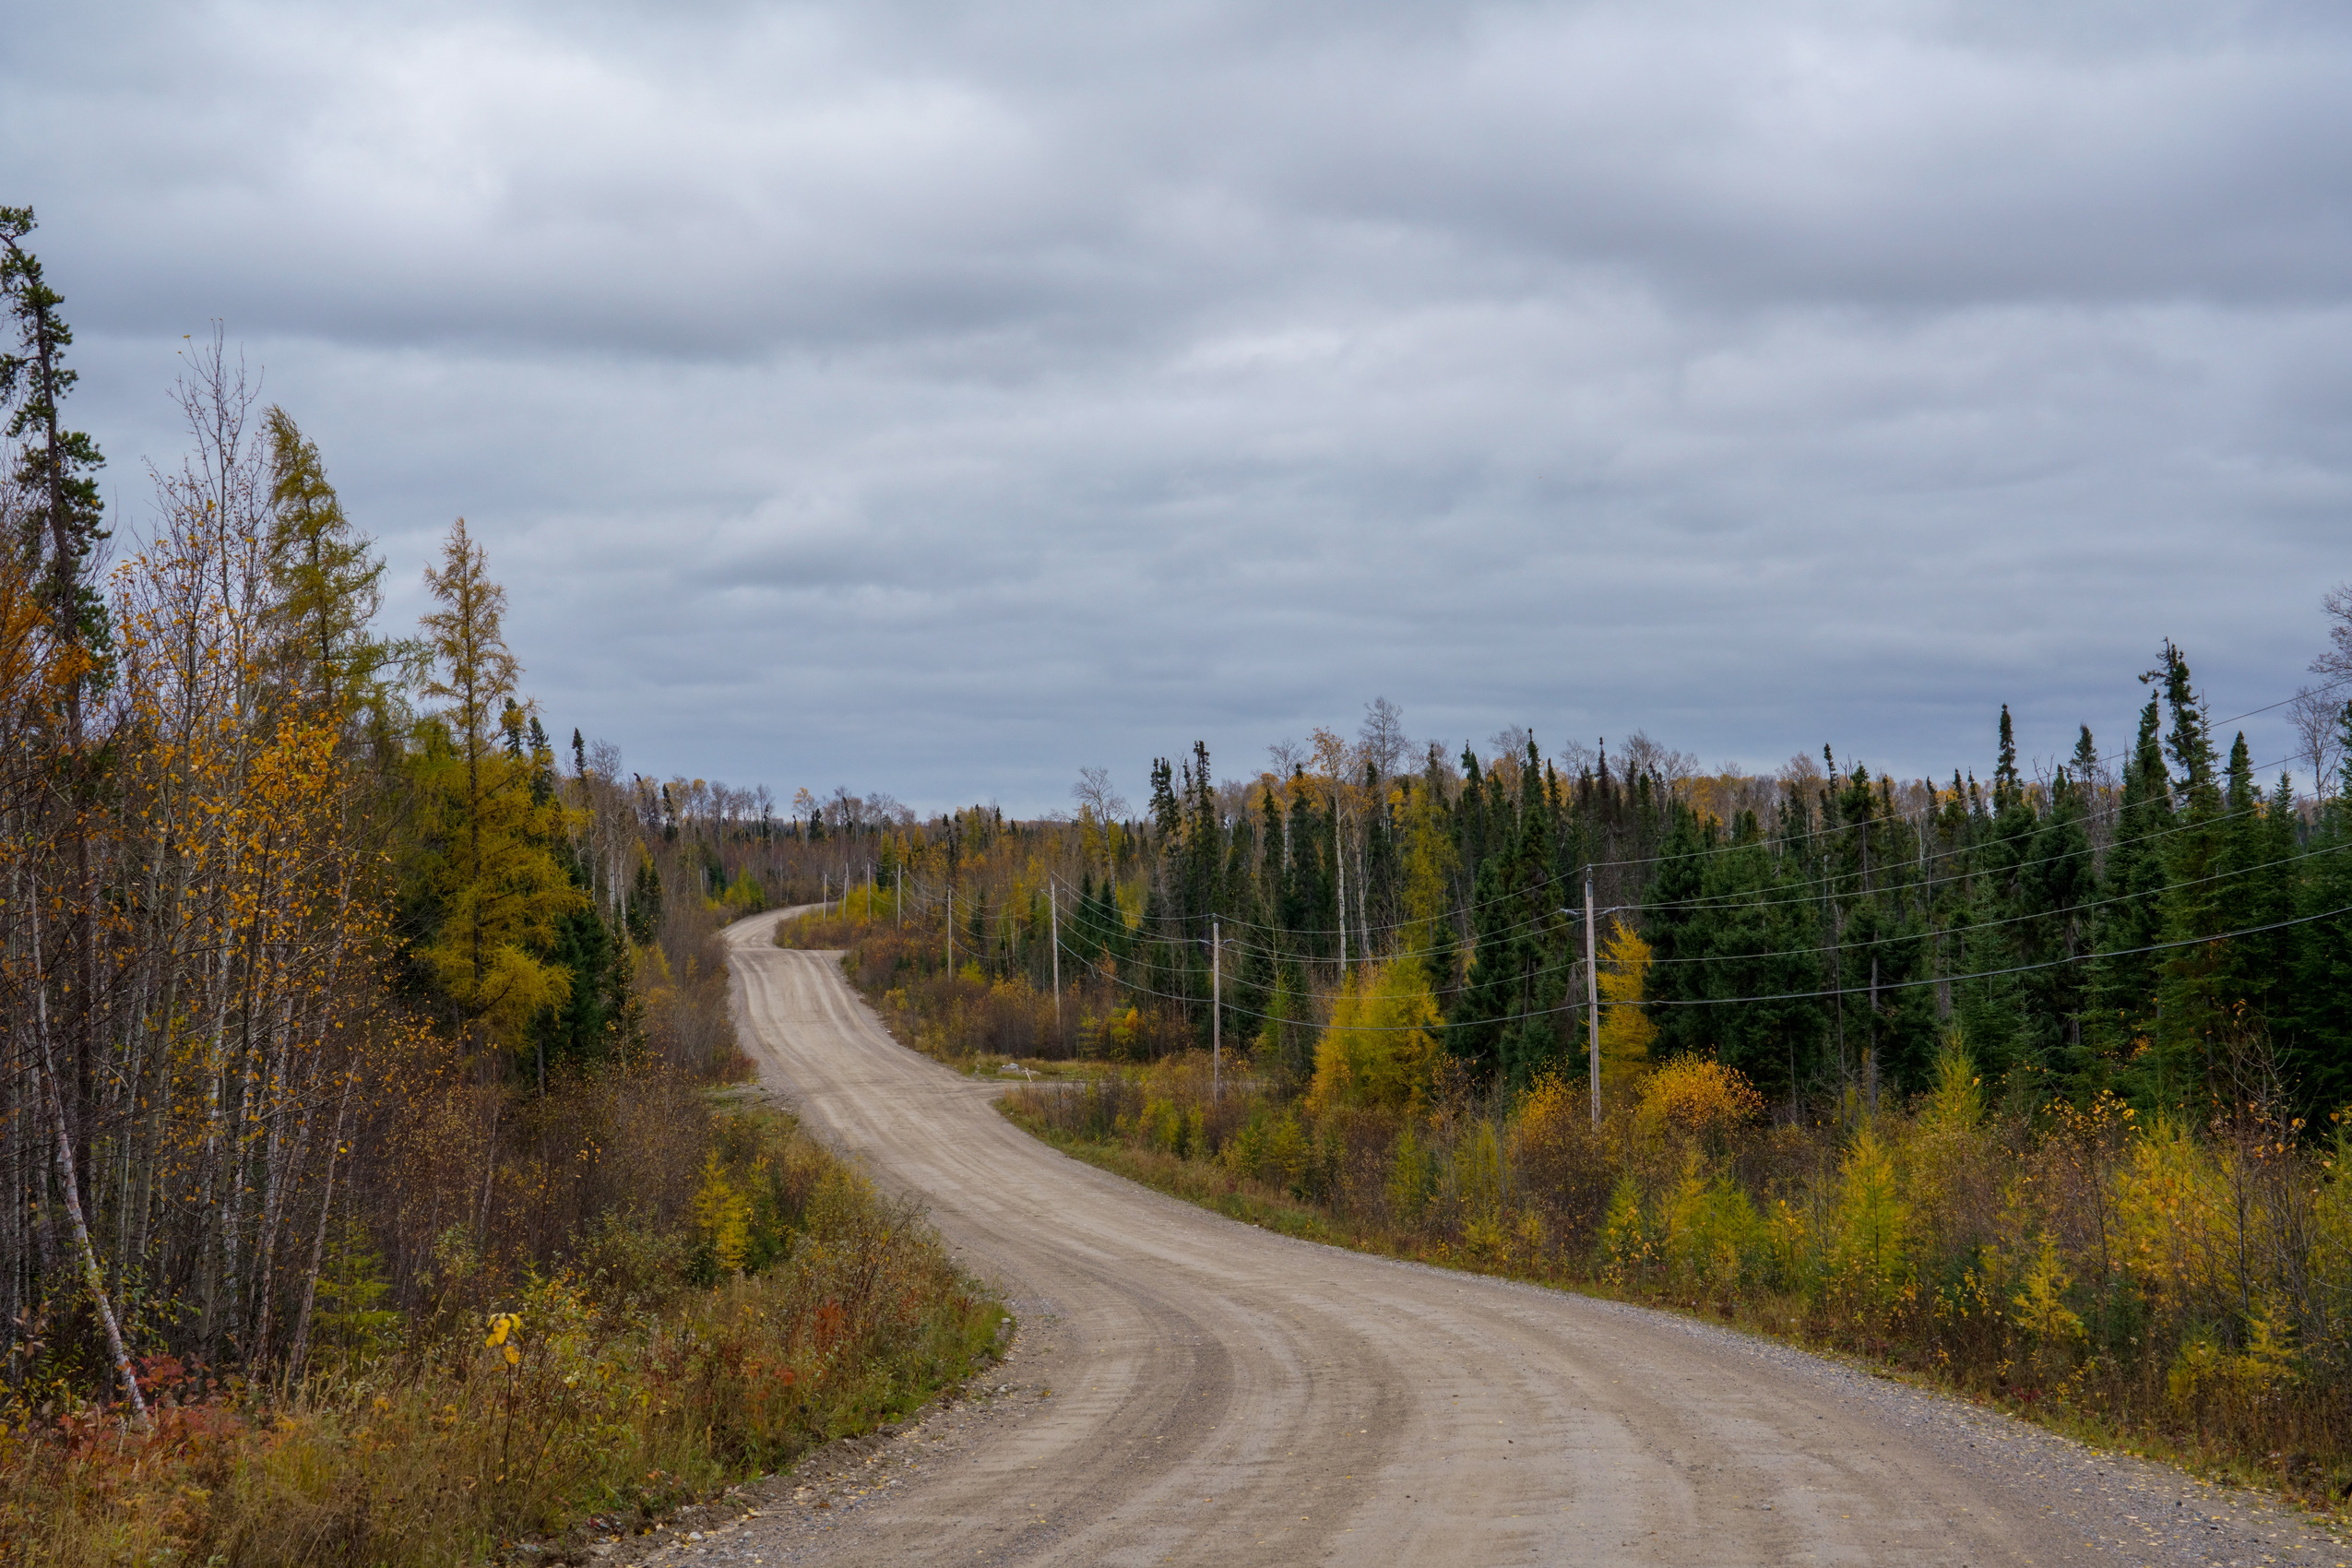 Ontario Ring of Fire: A bend in a road through forest